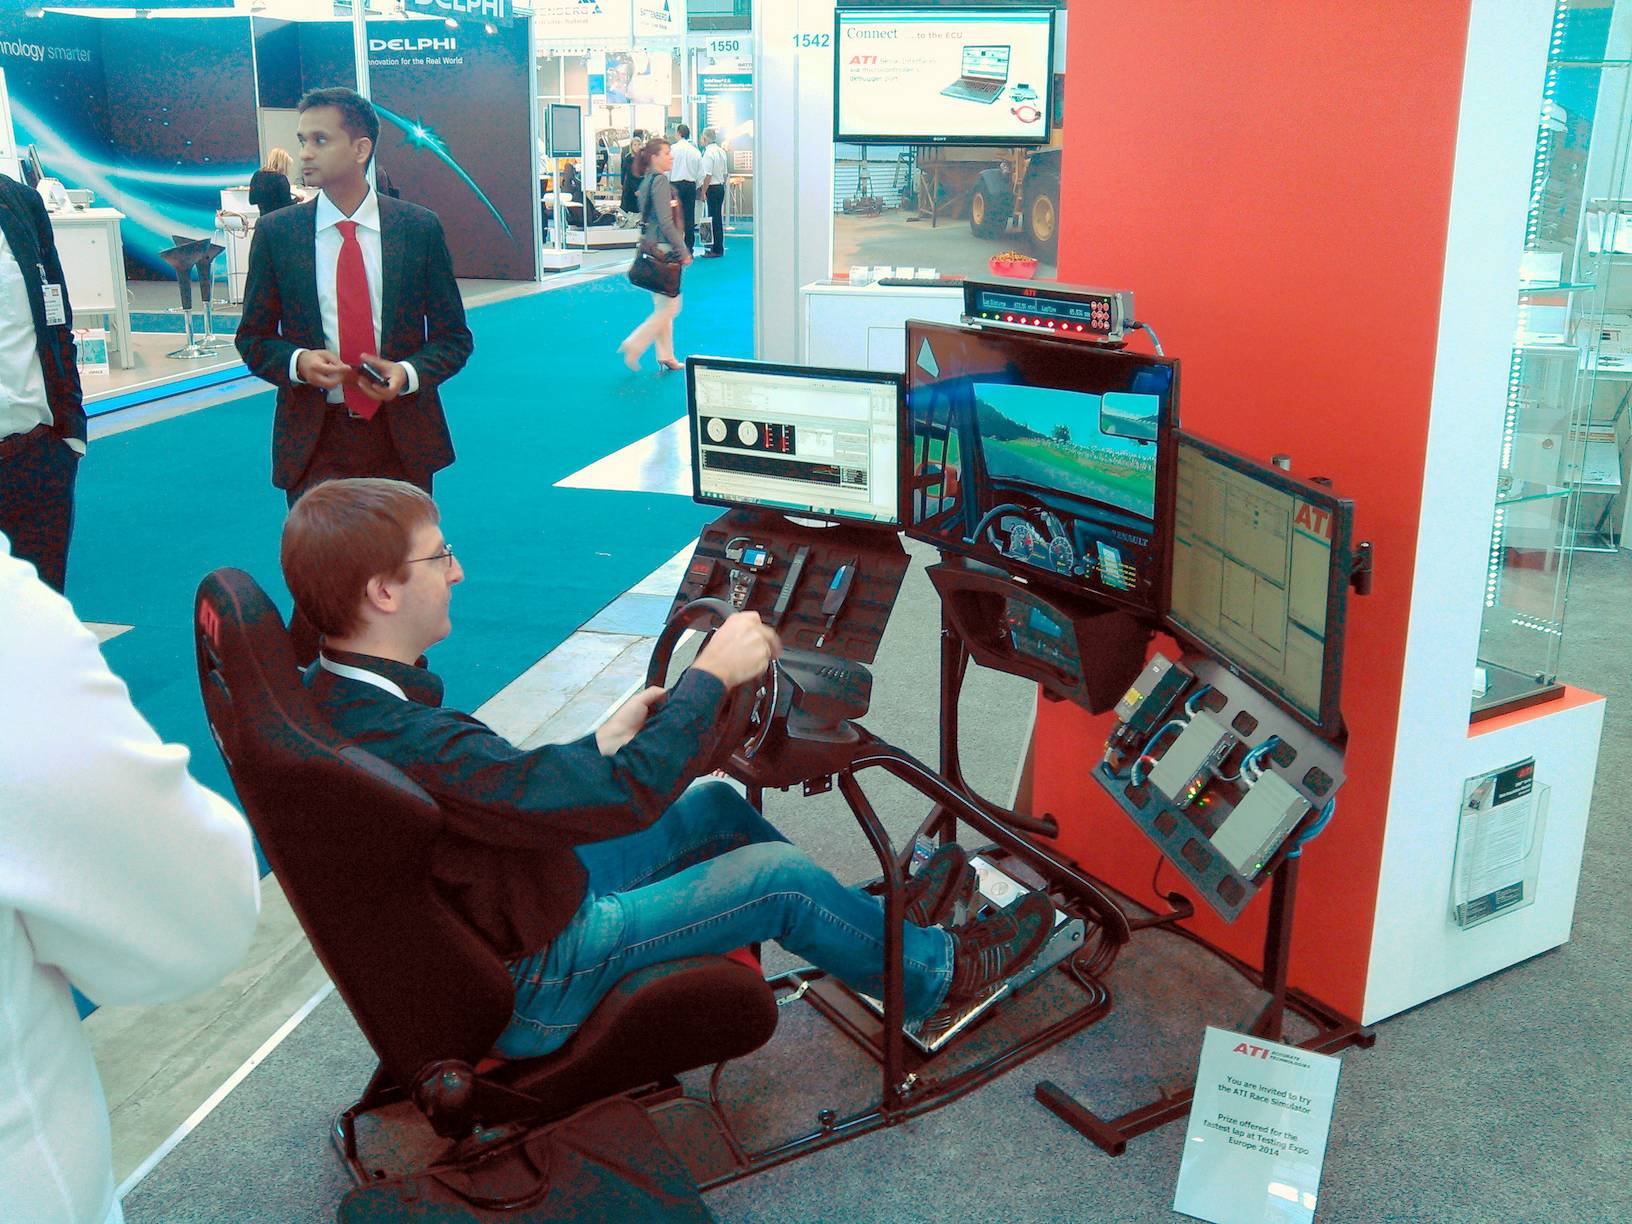 Kvaser at Automotive Testing Expo Europe 2014 – 24th to 26th June